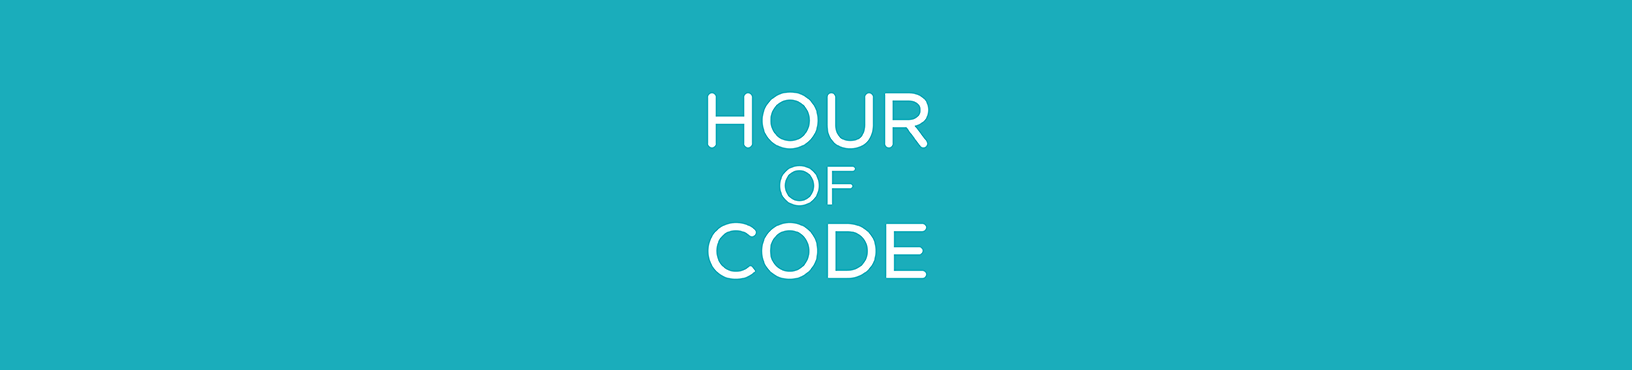 Watch The Complete Roblox Hour Of Code Tutorial Series Roblox Blog - hour of code roblox creator